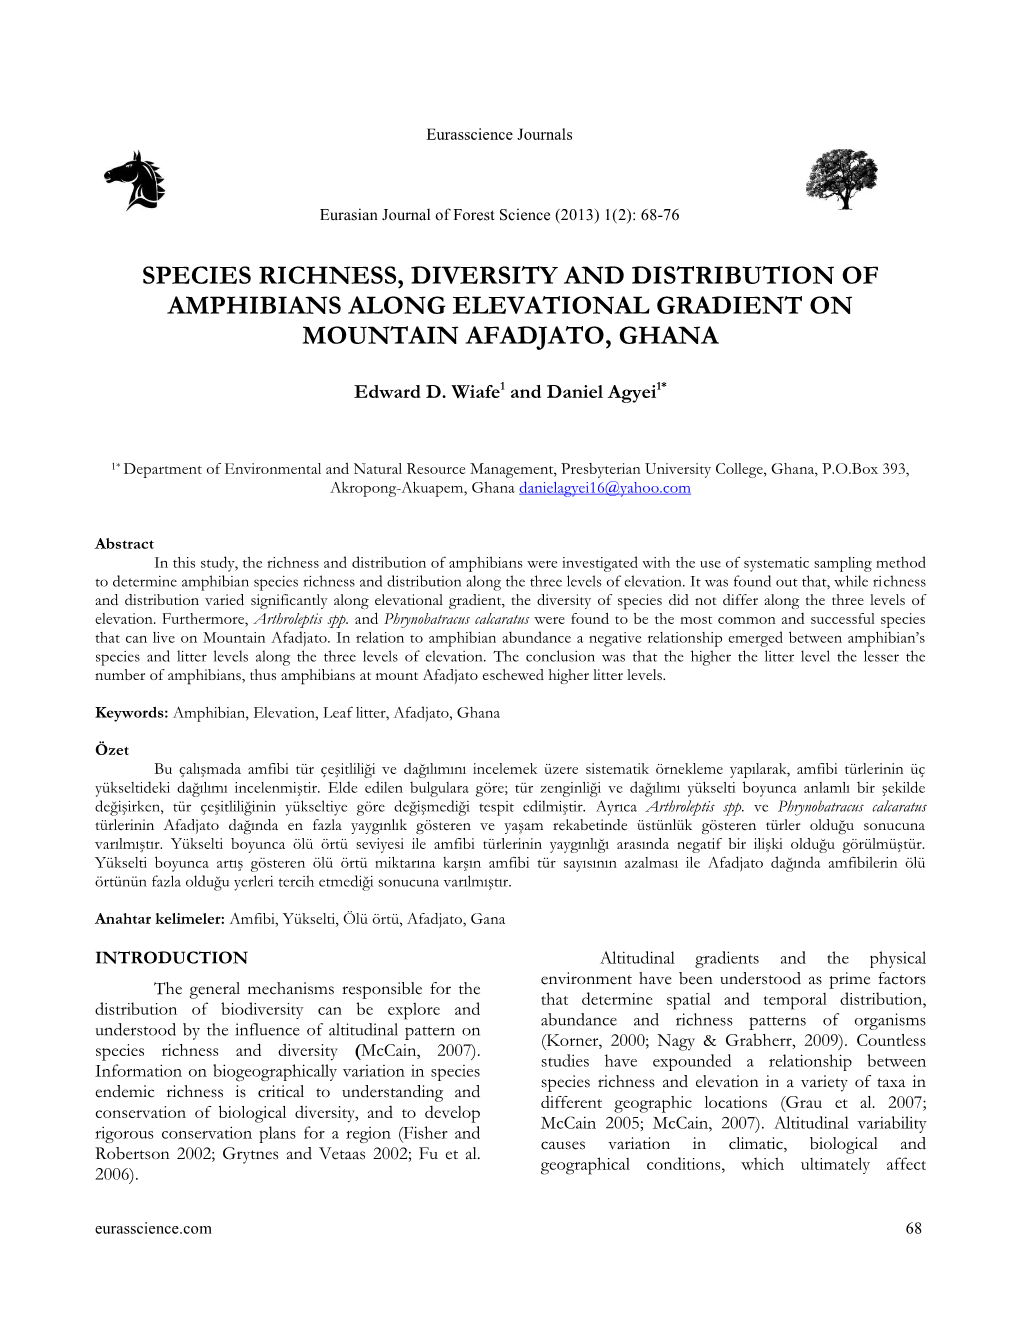 Species Richness, Diversity and Distribution of Amphibians Along Elevational Gradient on Mountain Afadjato, Ghana